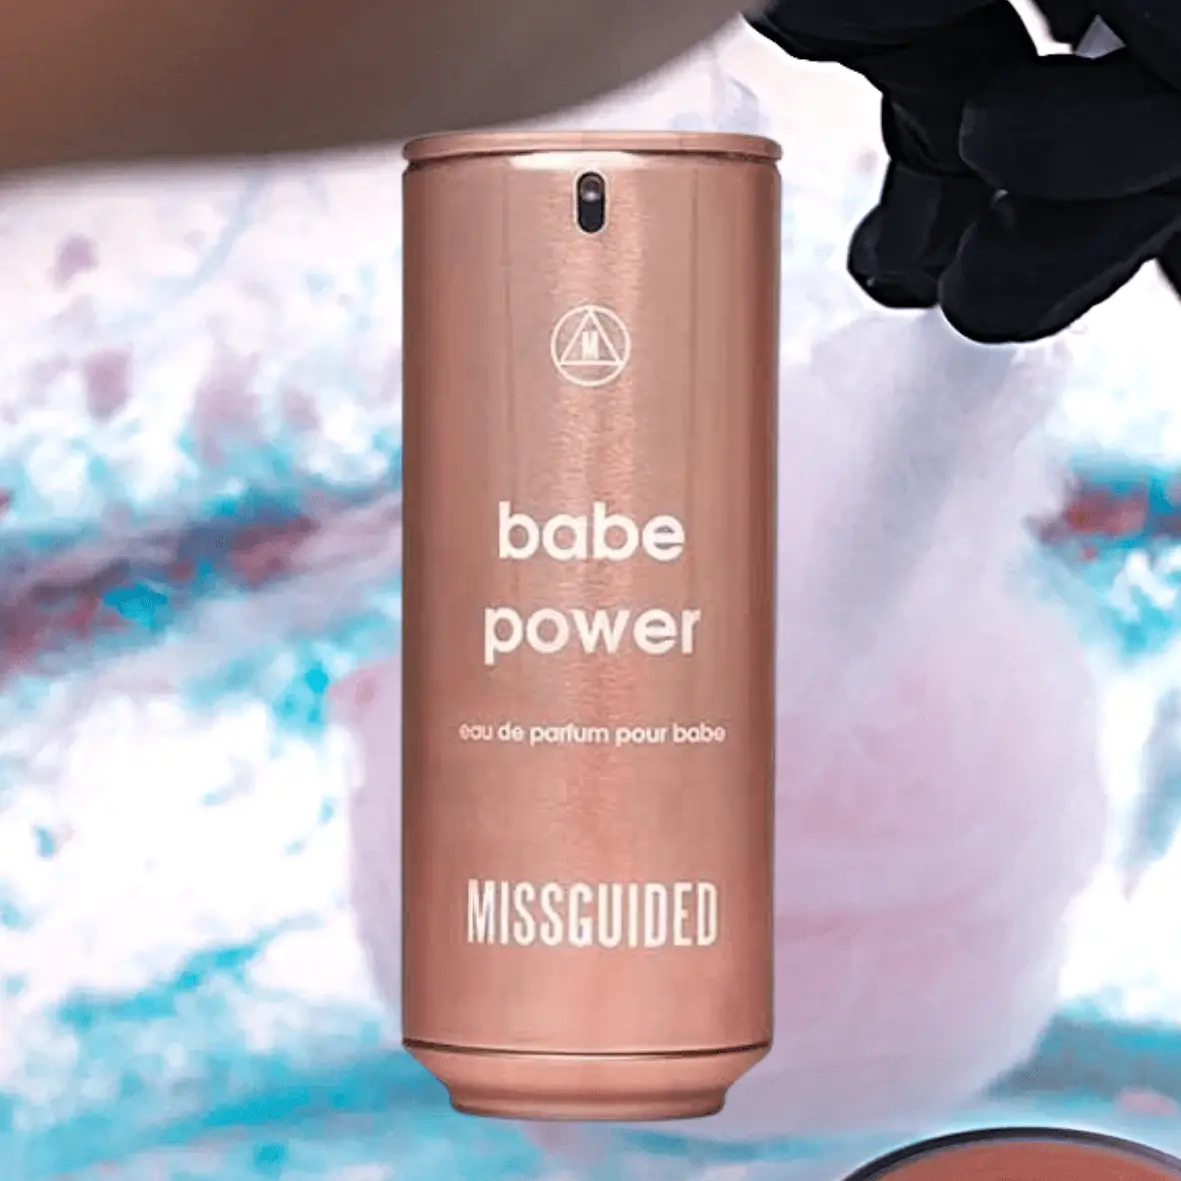 Missguided Babe Power
Best Cotton Candy Perfumes